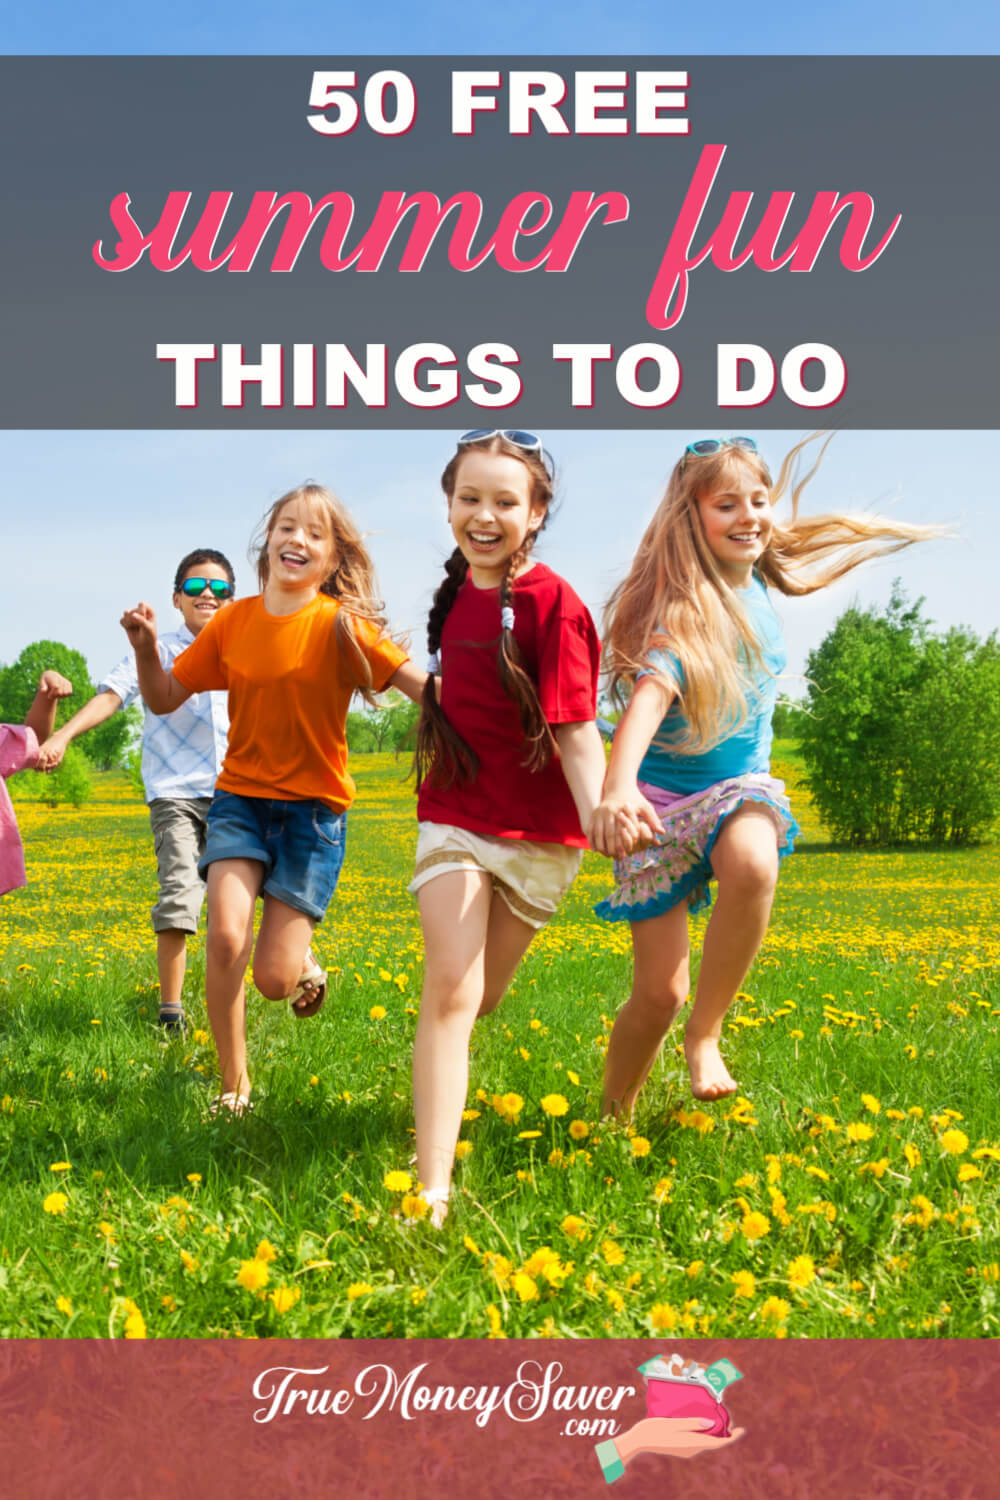 50 FREE Summer Fun Things To Do With Kids (Free Printable)